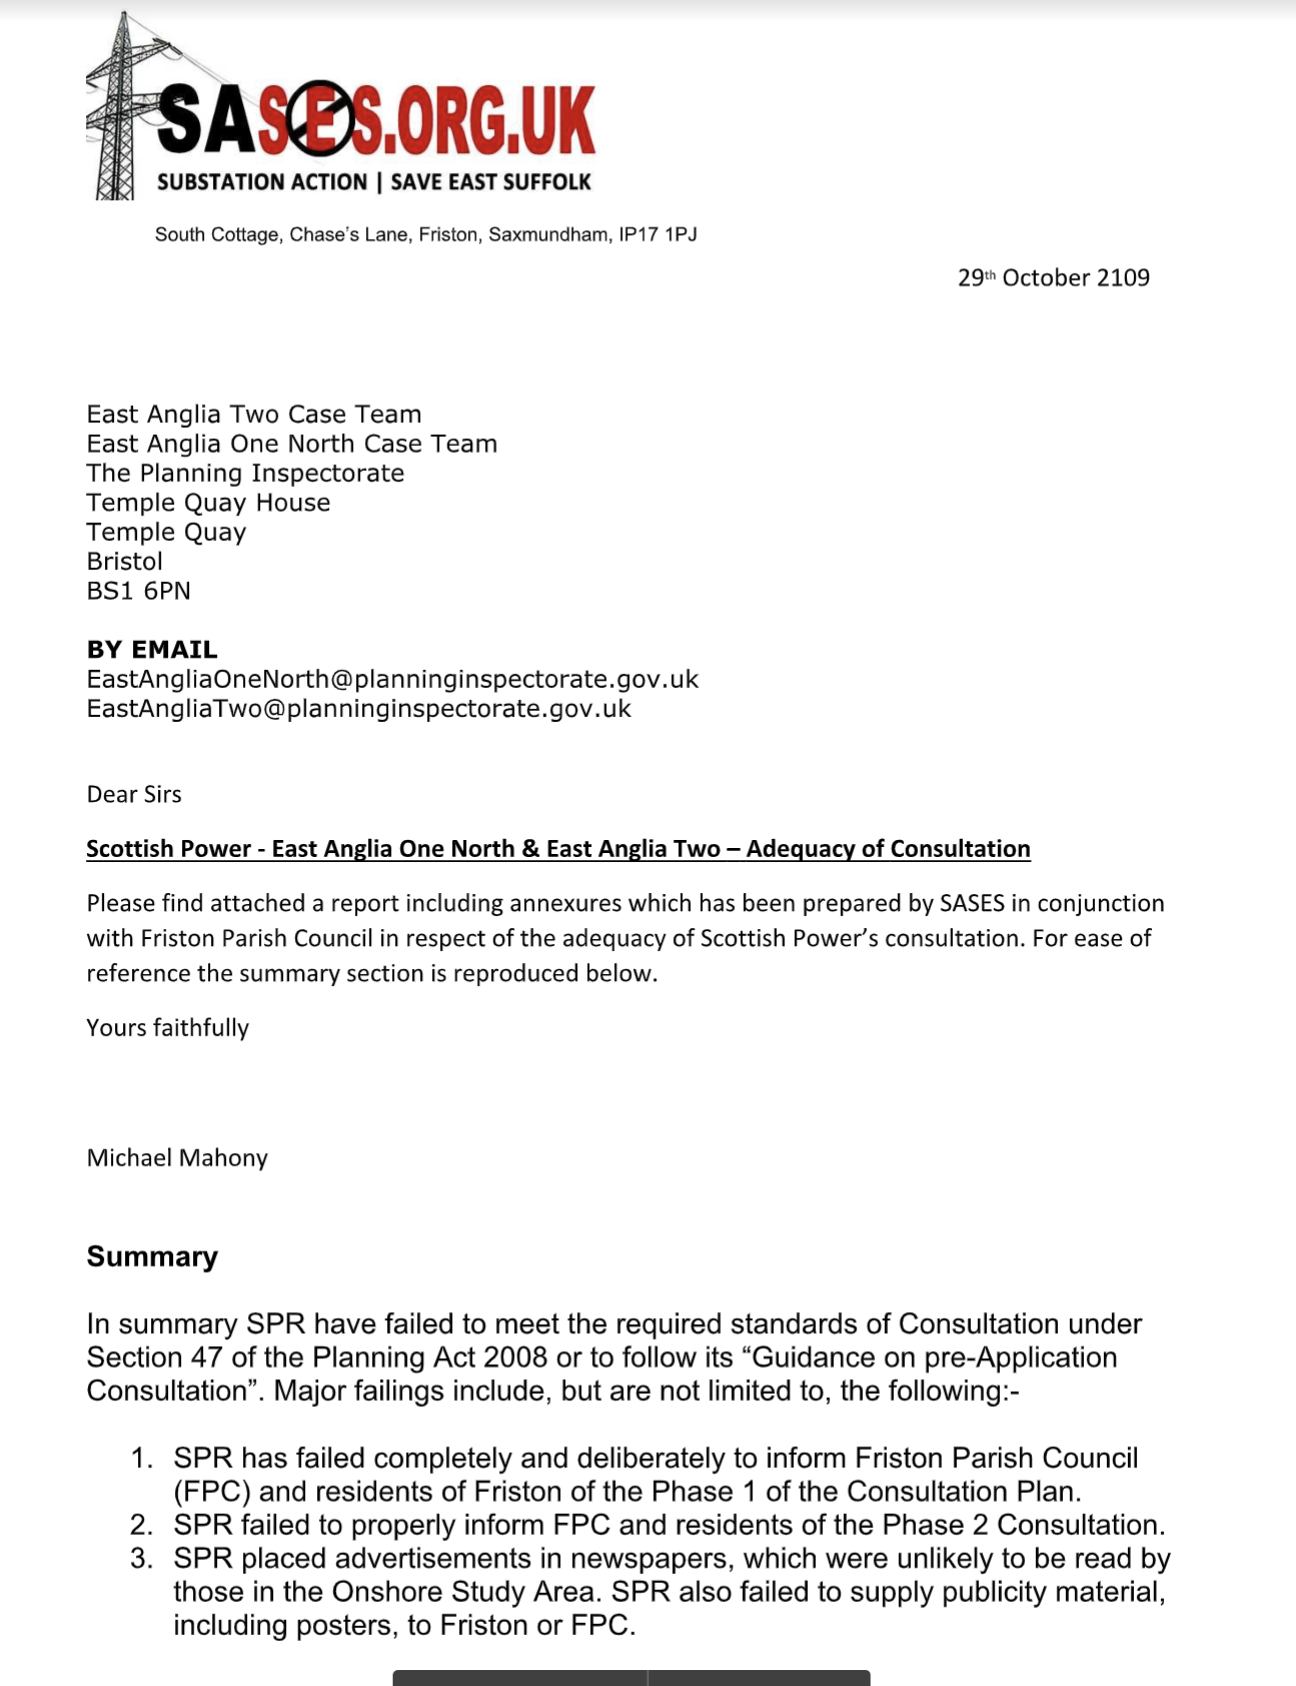 SASES letter to PINS EA1N & EA2 Consultations not acceptable page 1.